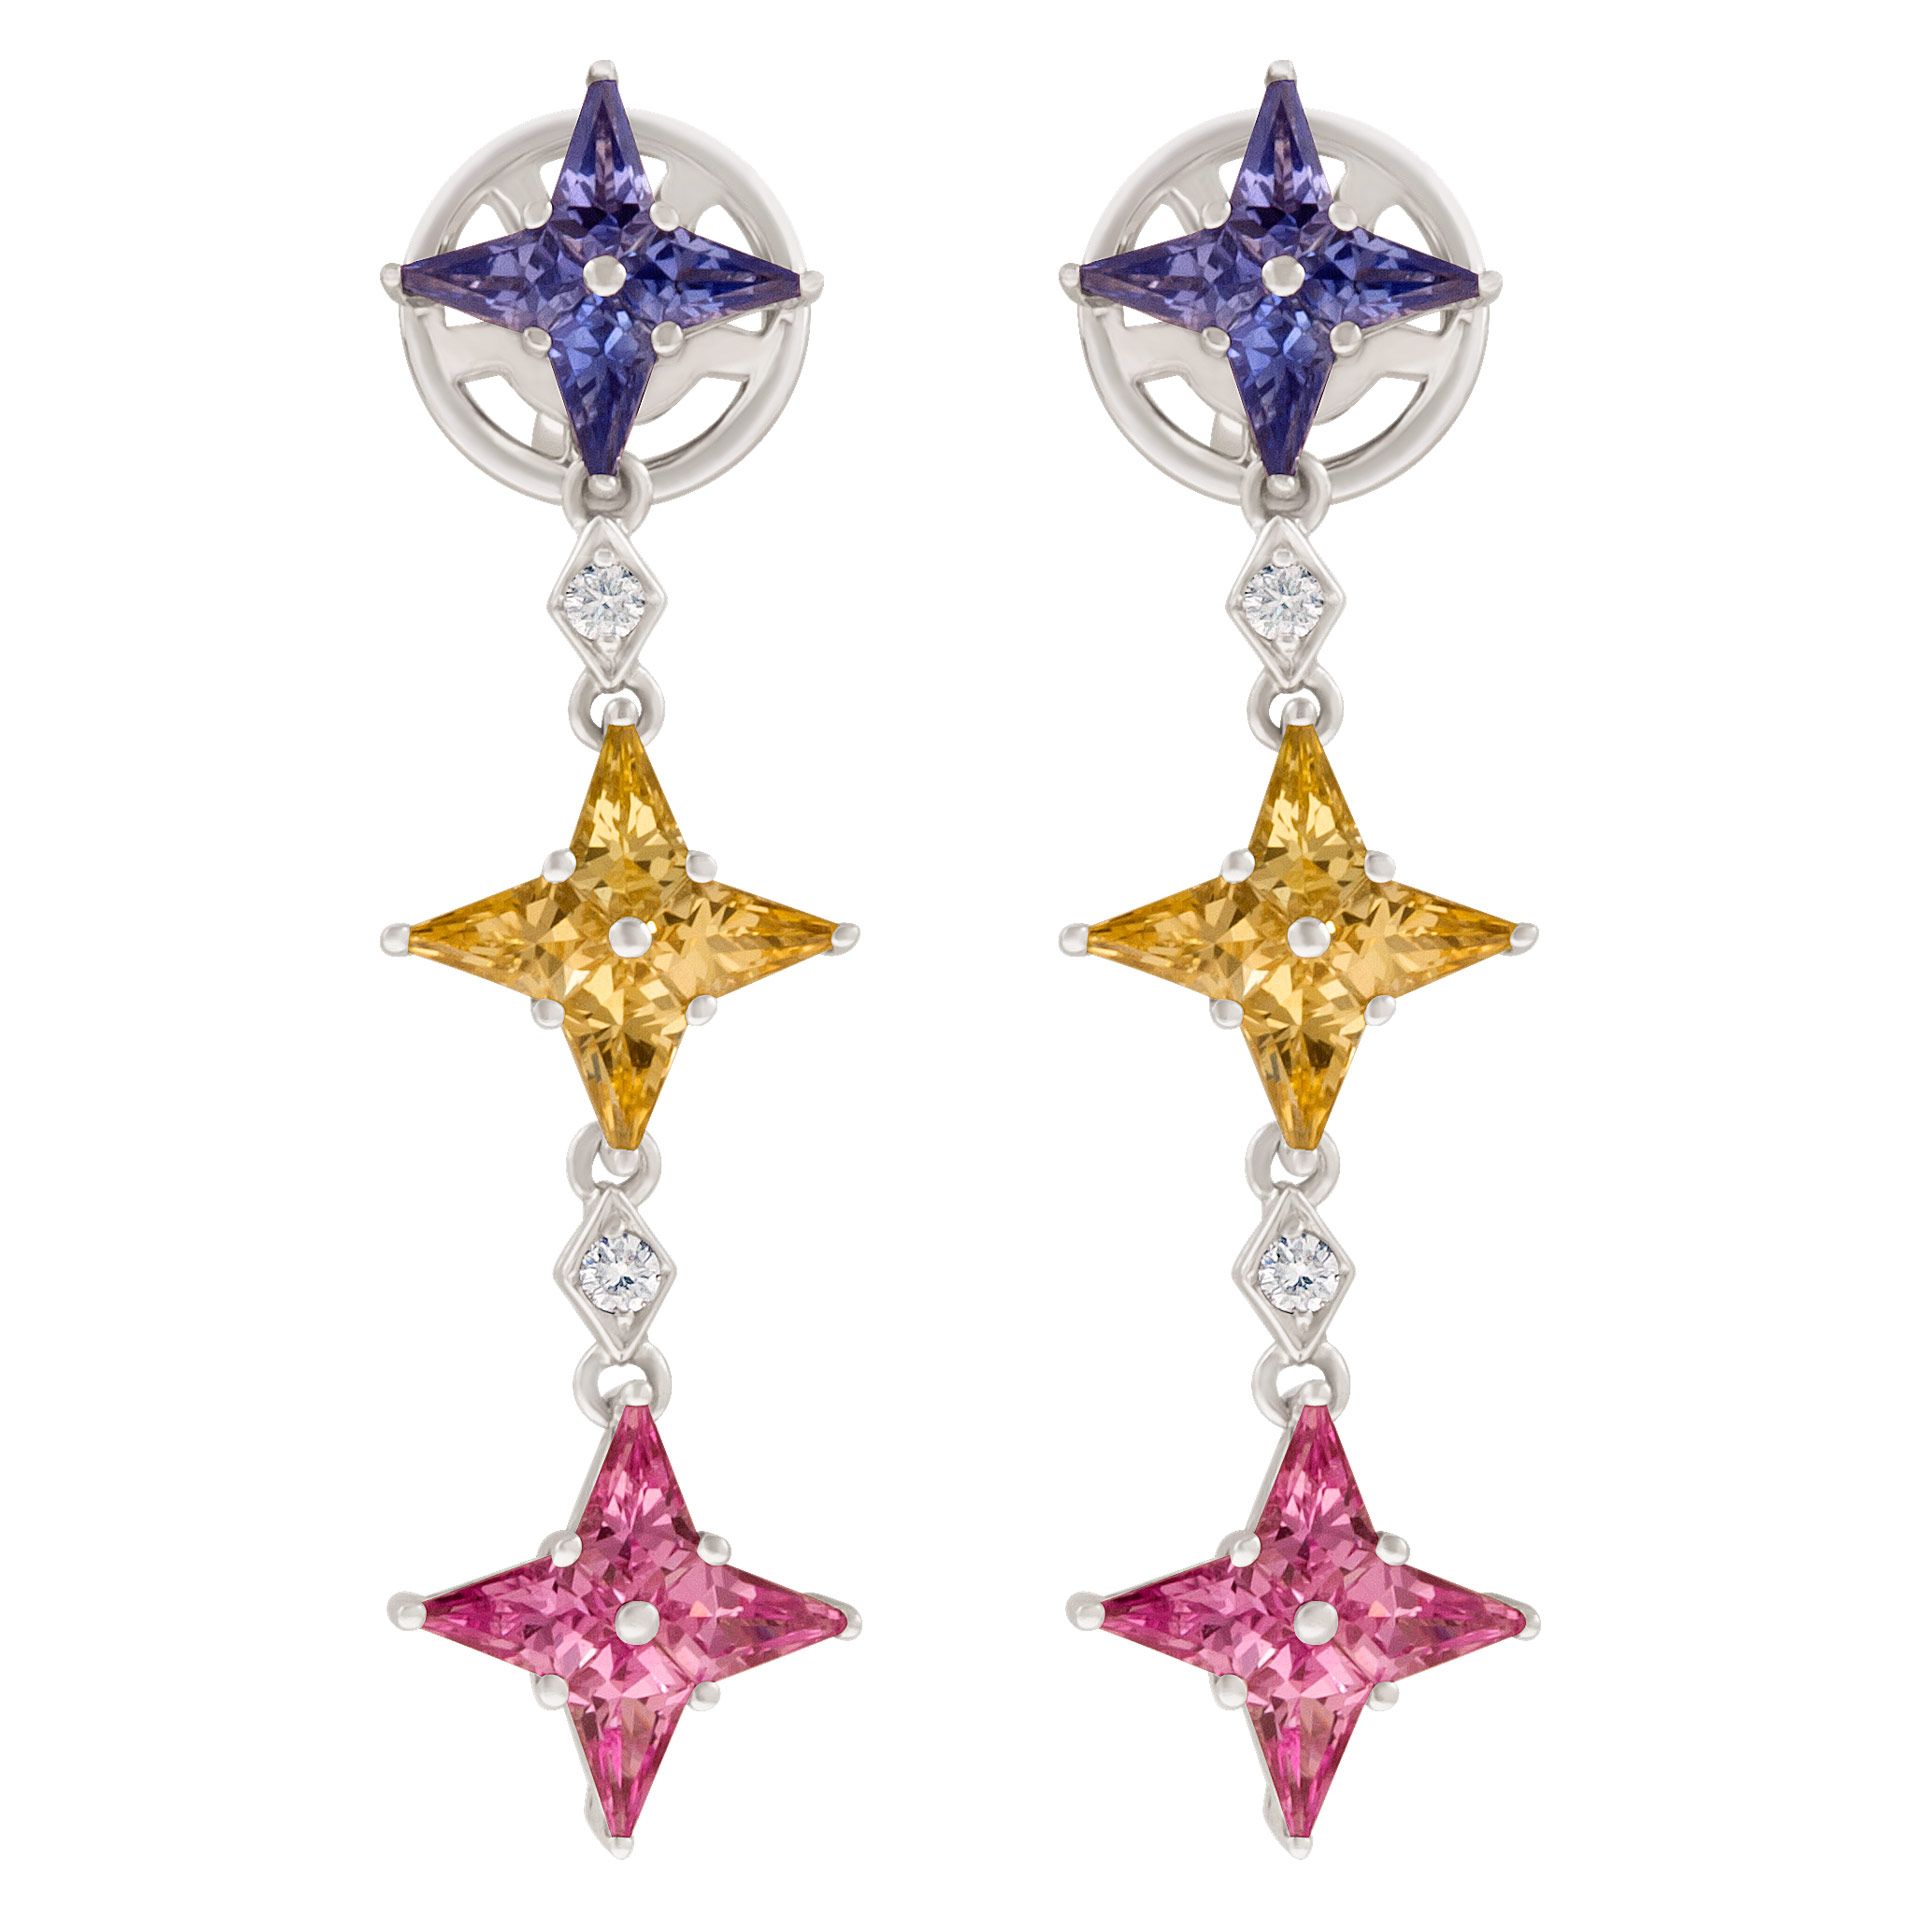 Multi Sapphire earrings in 18k white gold with diamond accents image 1